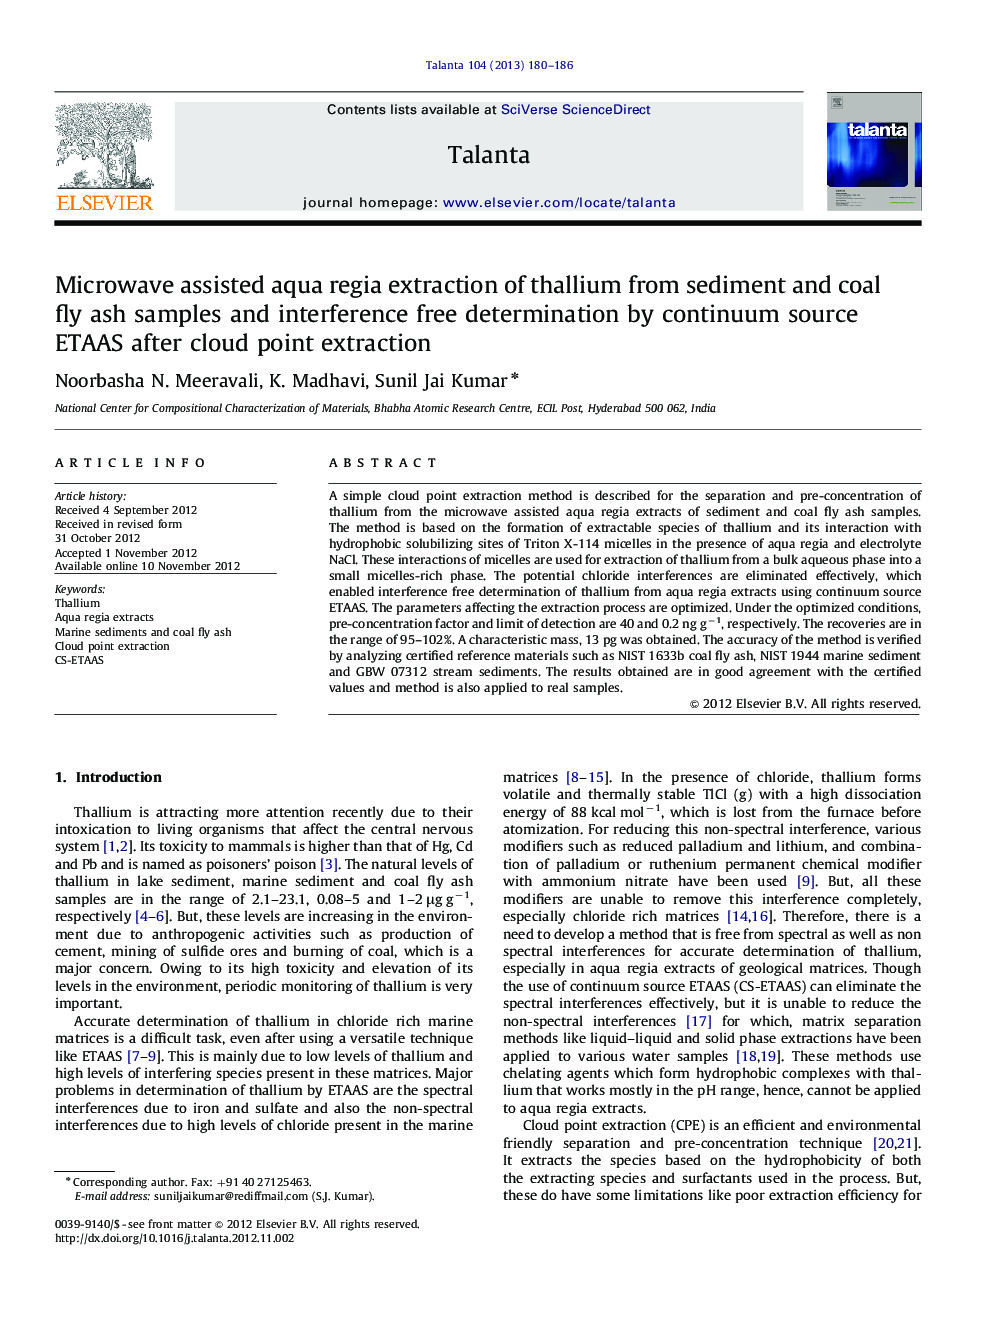 Microwave assisted aqua regia extraction of thallium from sediment and coal fly ash samples and interference free determination by continuum source ETAAS after cloud point extraction